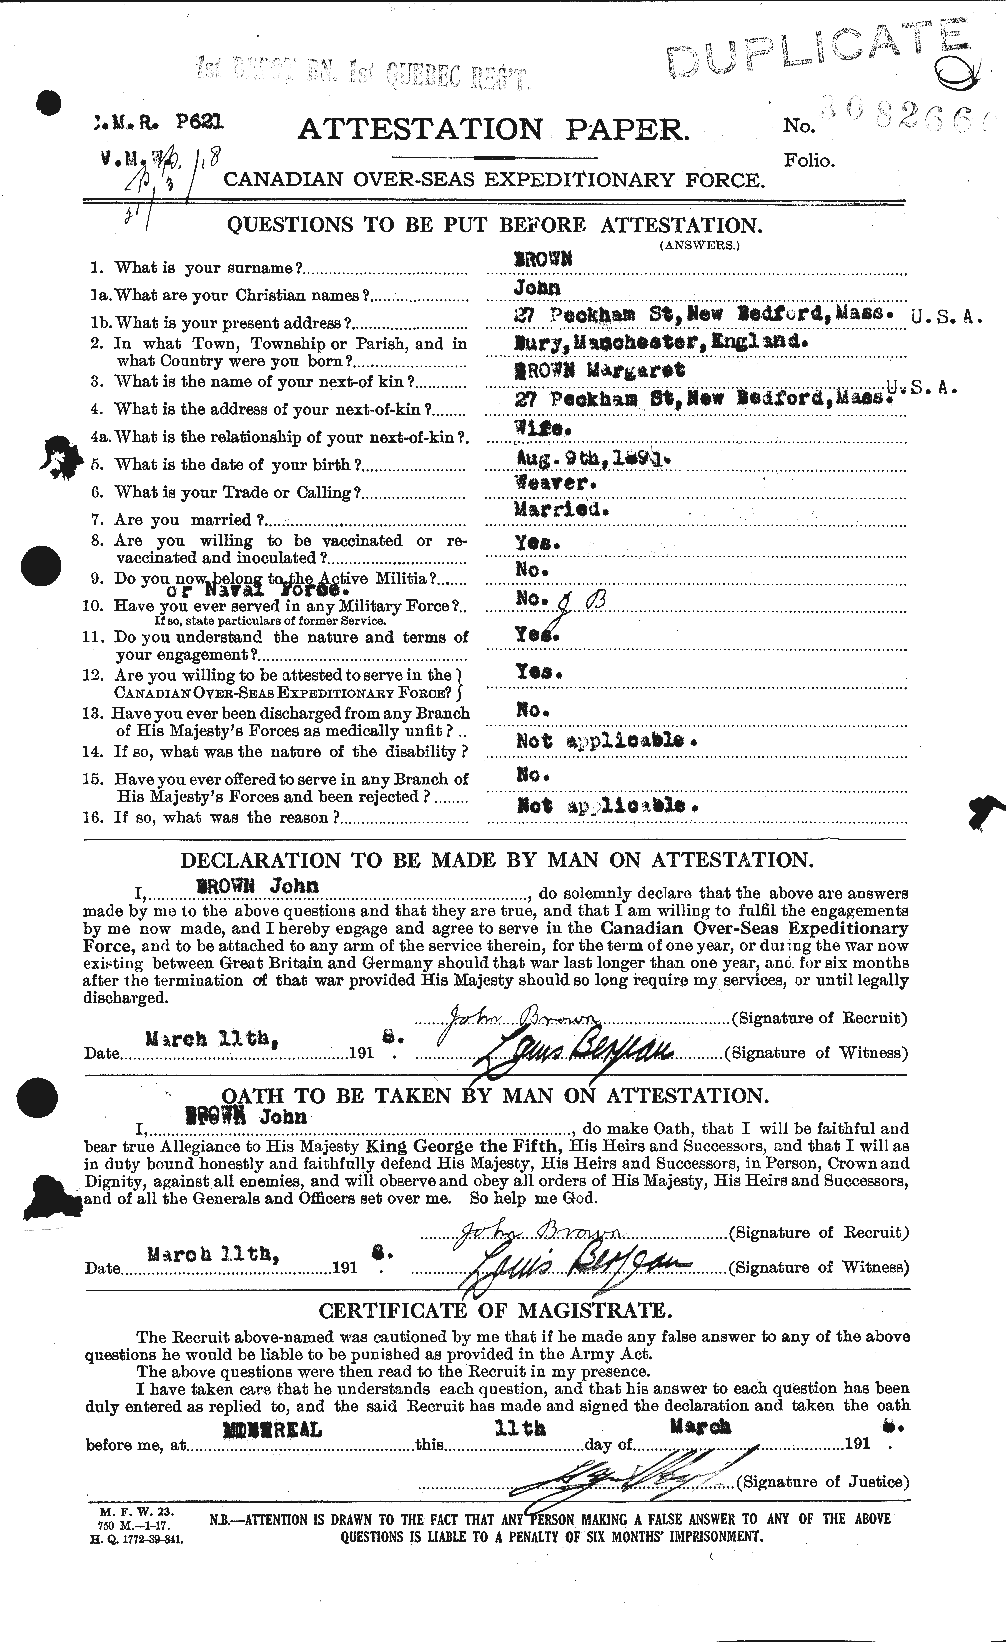 Personnel Records of the First World War - CEF 264554a